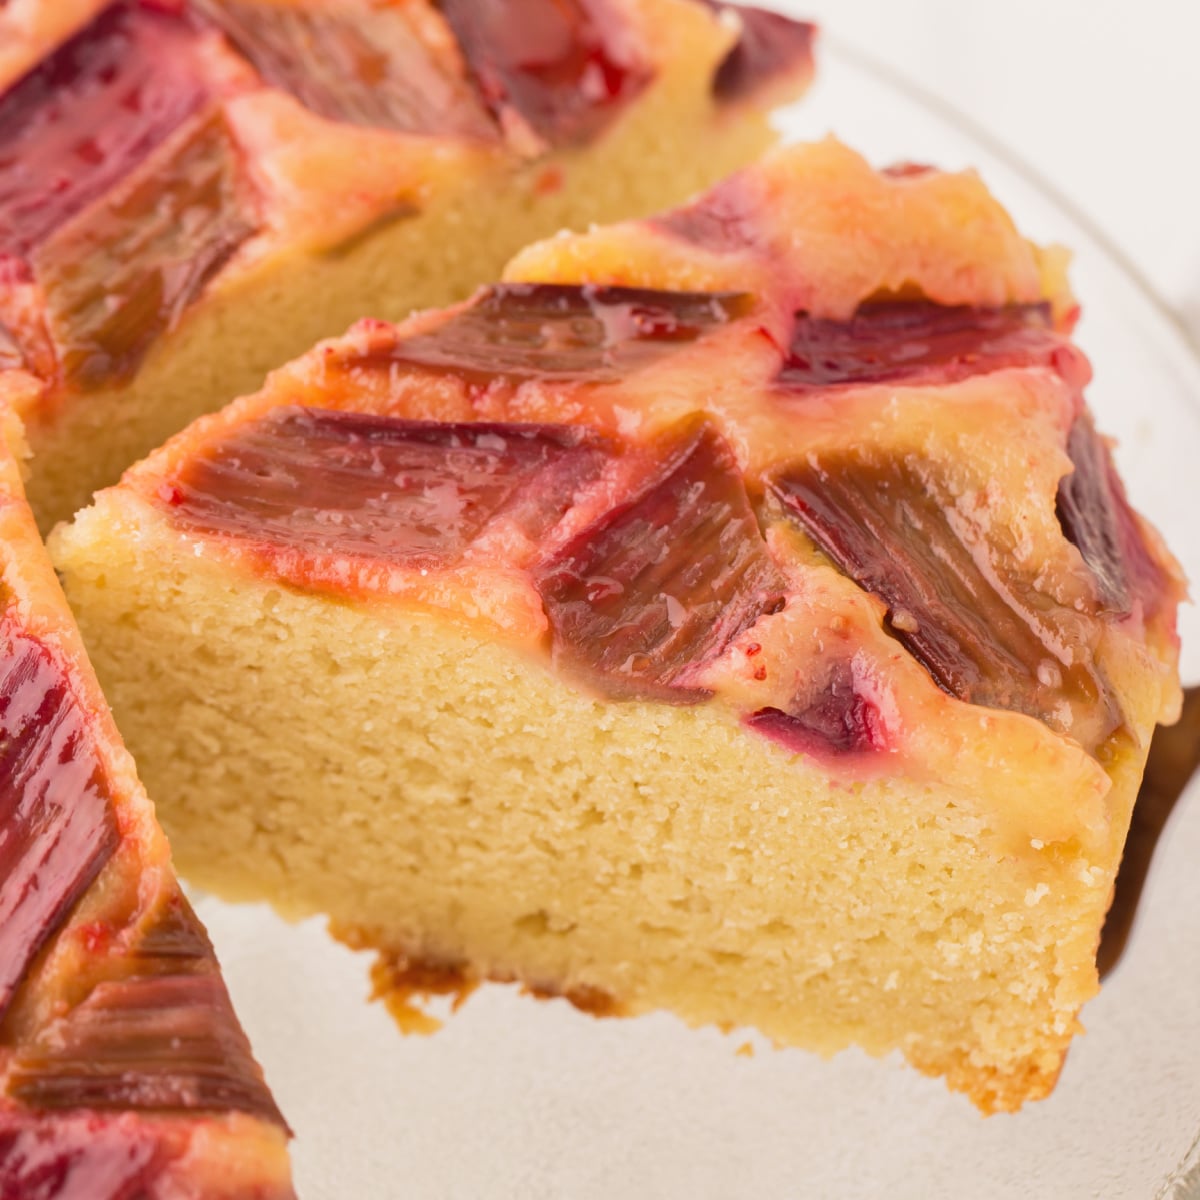 A slice of rhubarb cake being taken from the cake. 